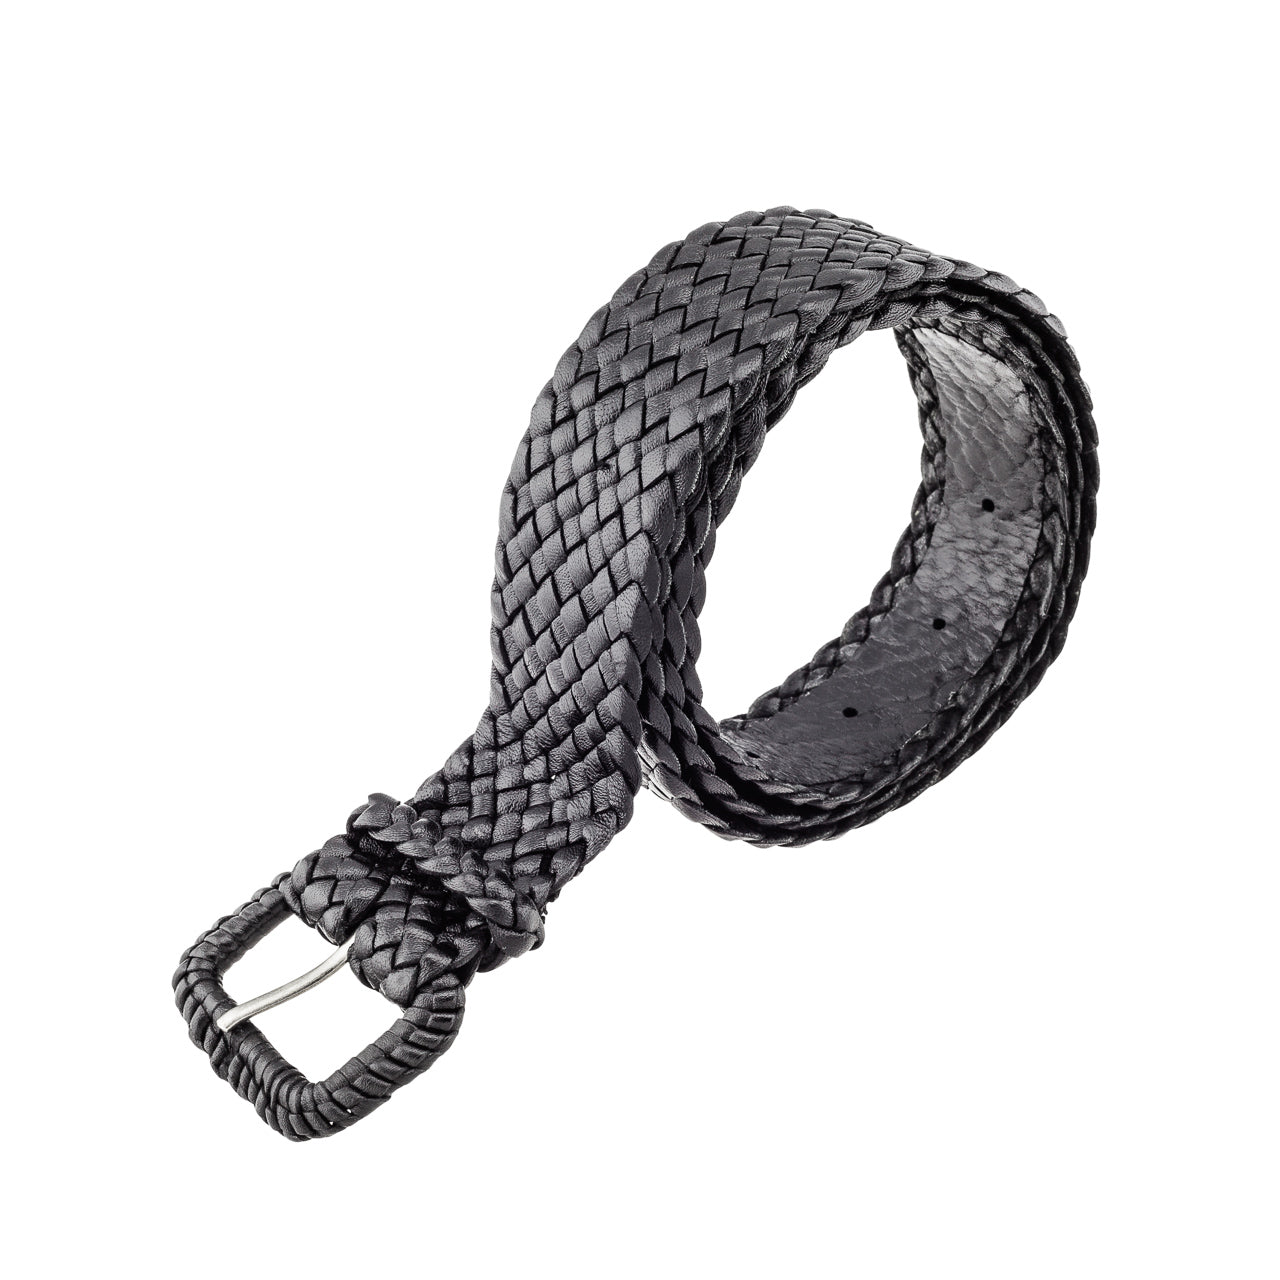 Black Ladies Jackaroo: hardworking, belt. Contemporary, perfect for any outfit. 12 strands Kangaroo Leather, hand-plaited in Brisbane. Durable, supple, stylish. 